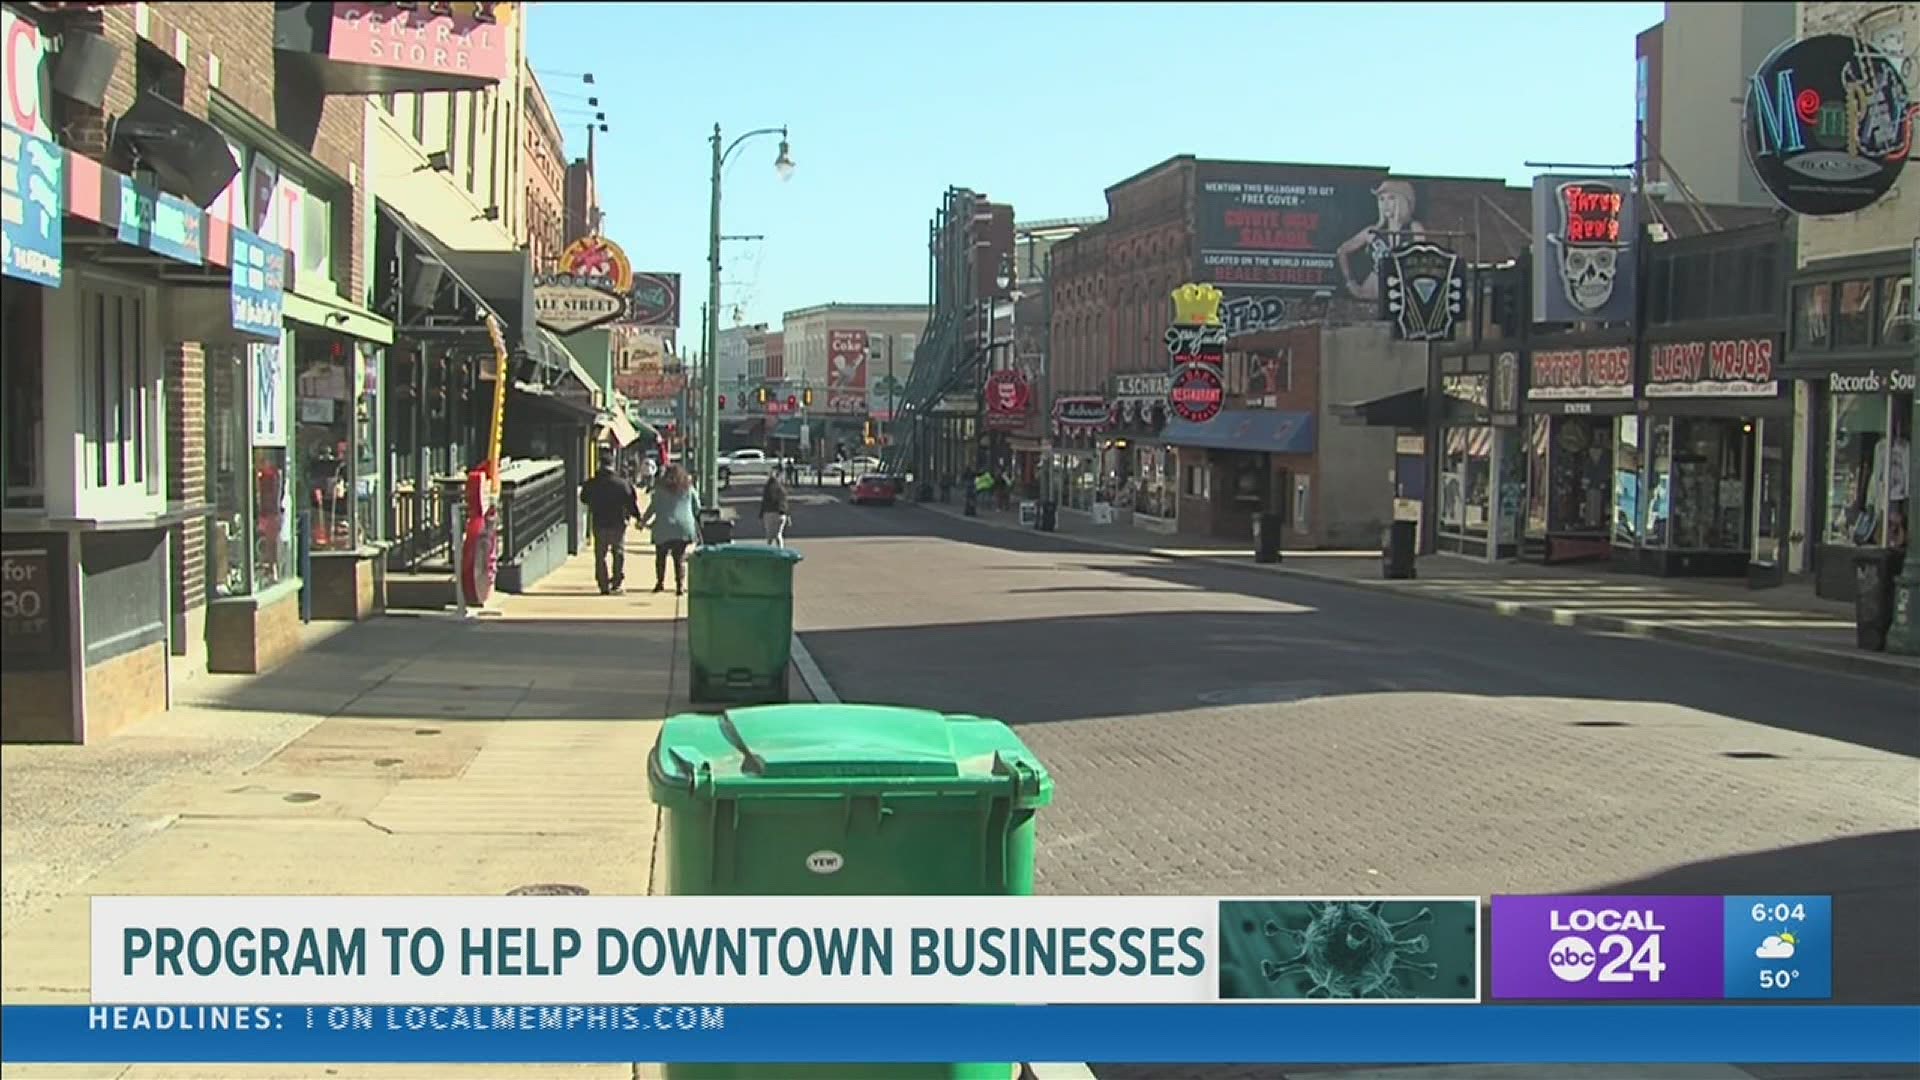 It's called a "business continuity grant" and is meant to offer a lifeline to small locally-owned business suffering because of the pandemic.